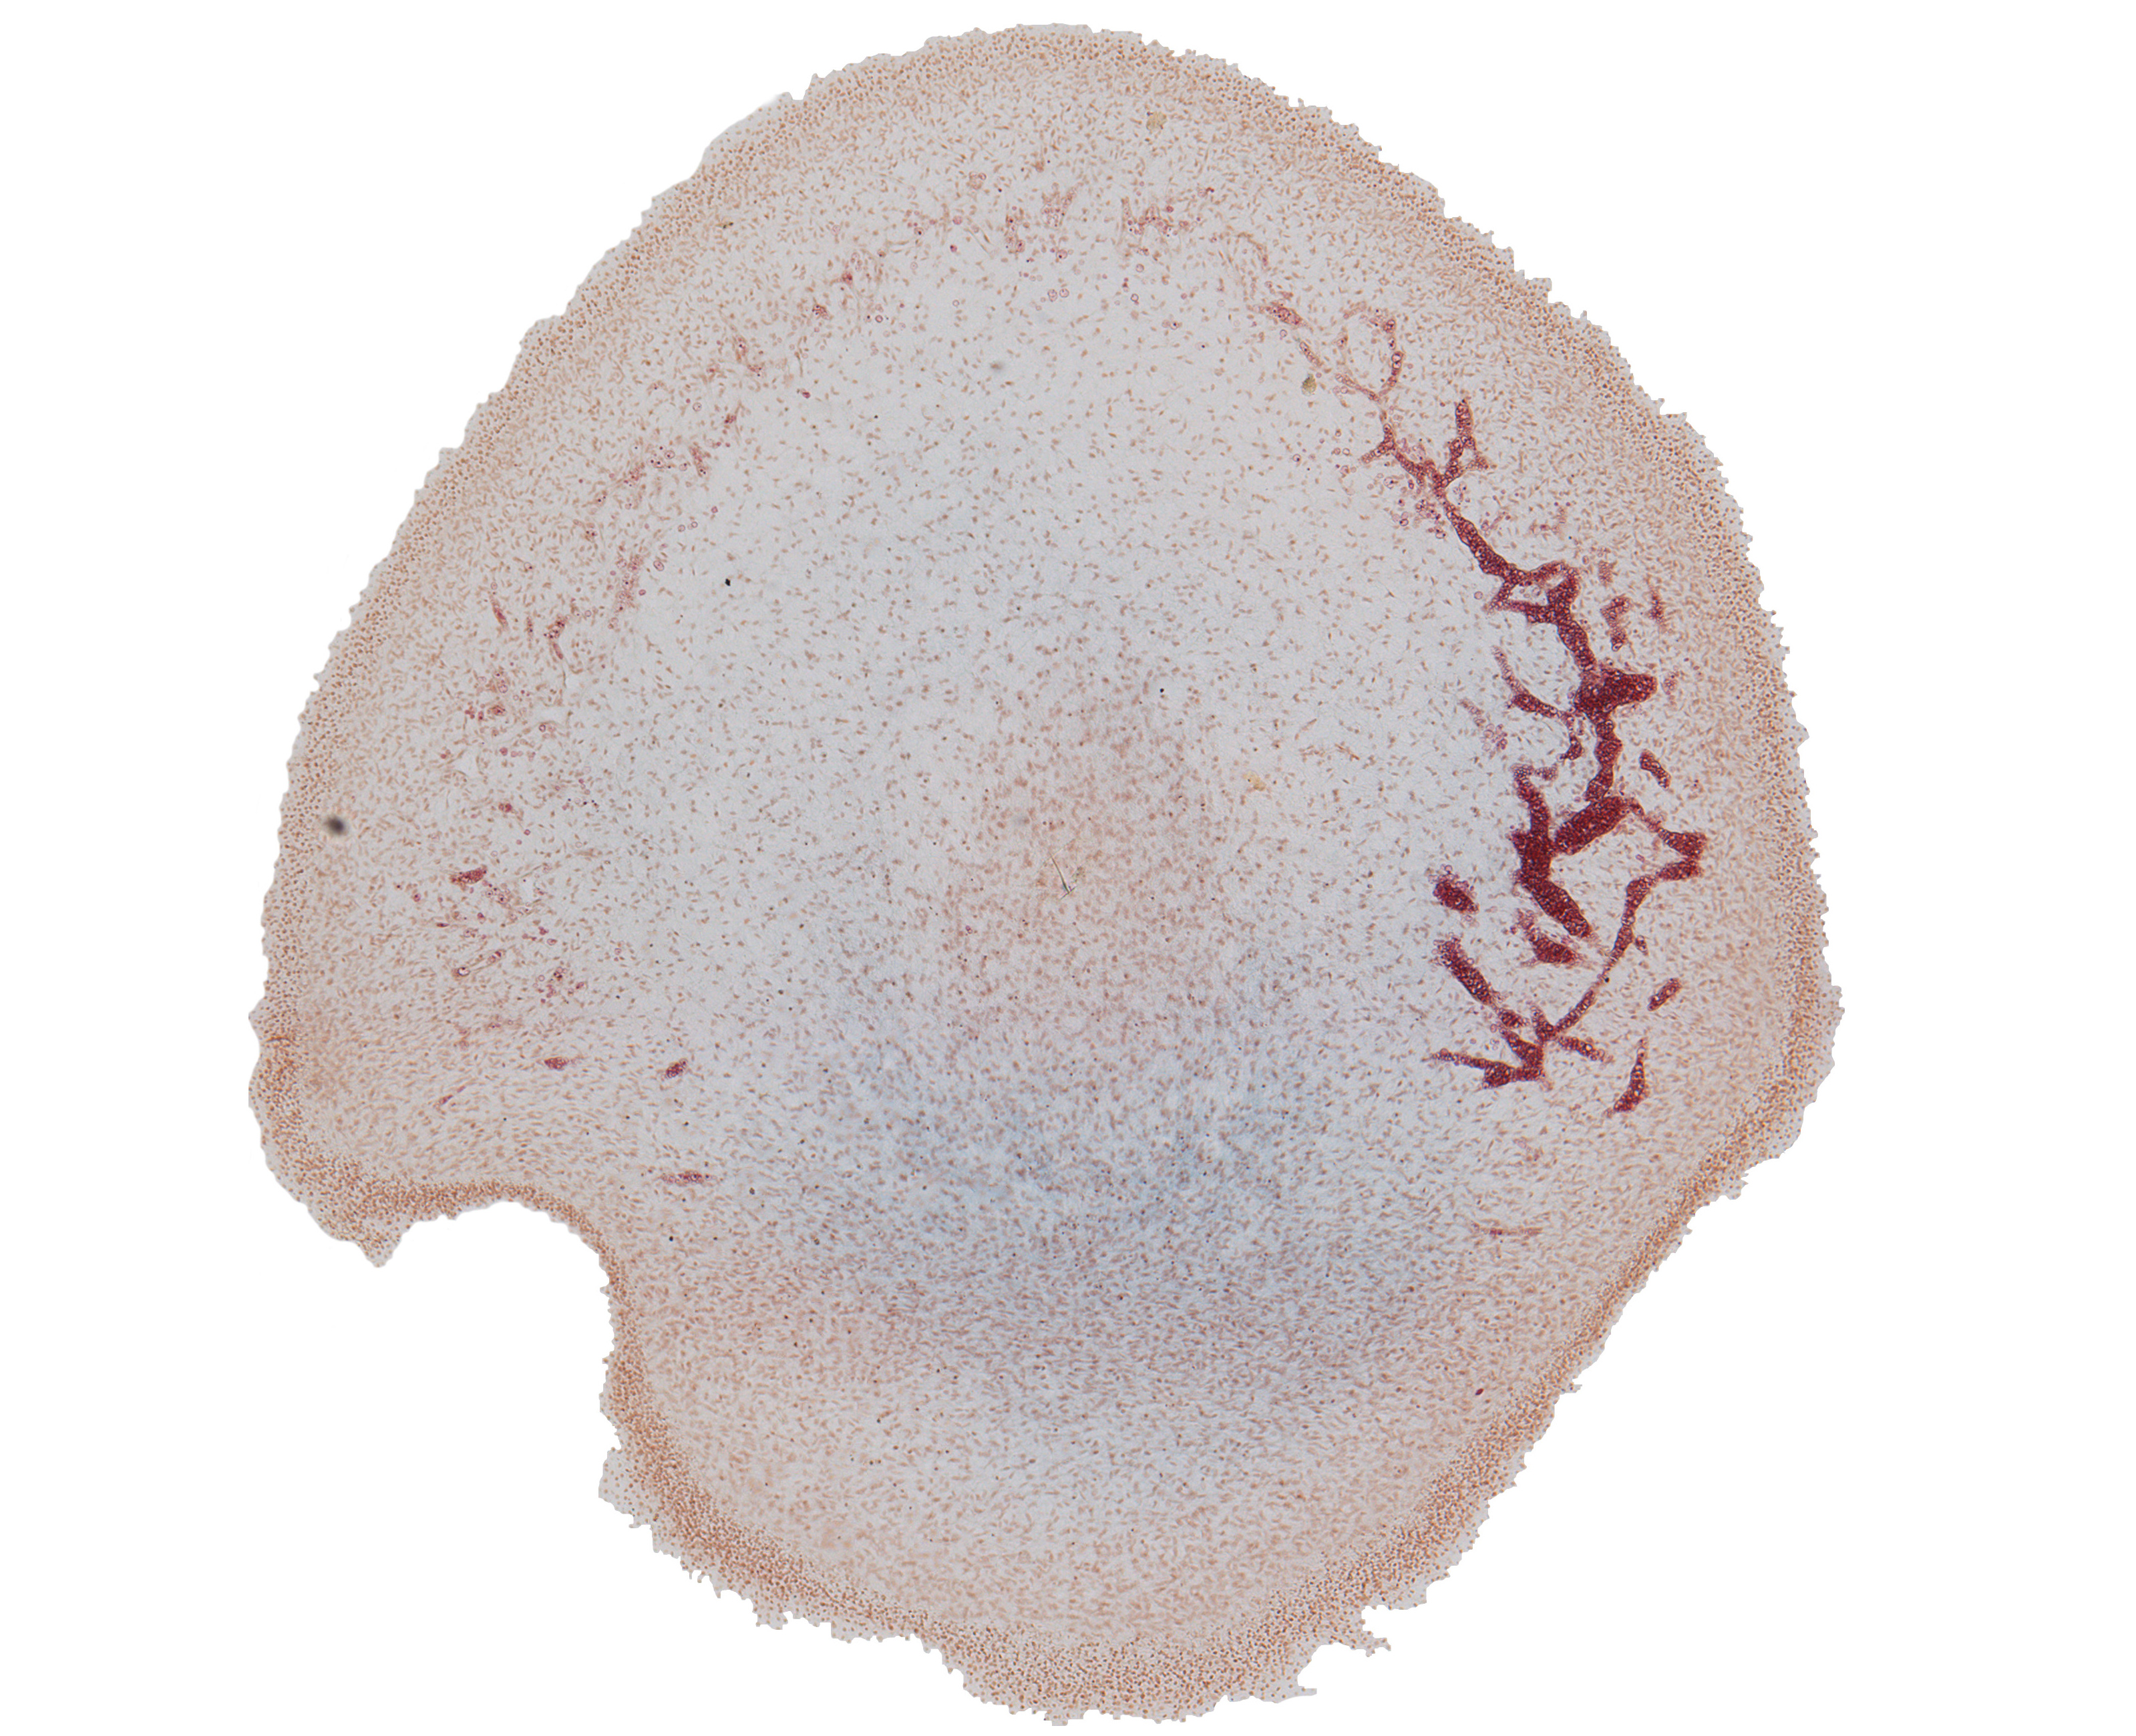 Osteogenic Layer at Top of Head